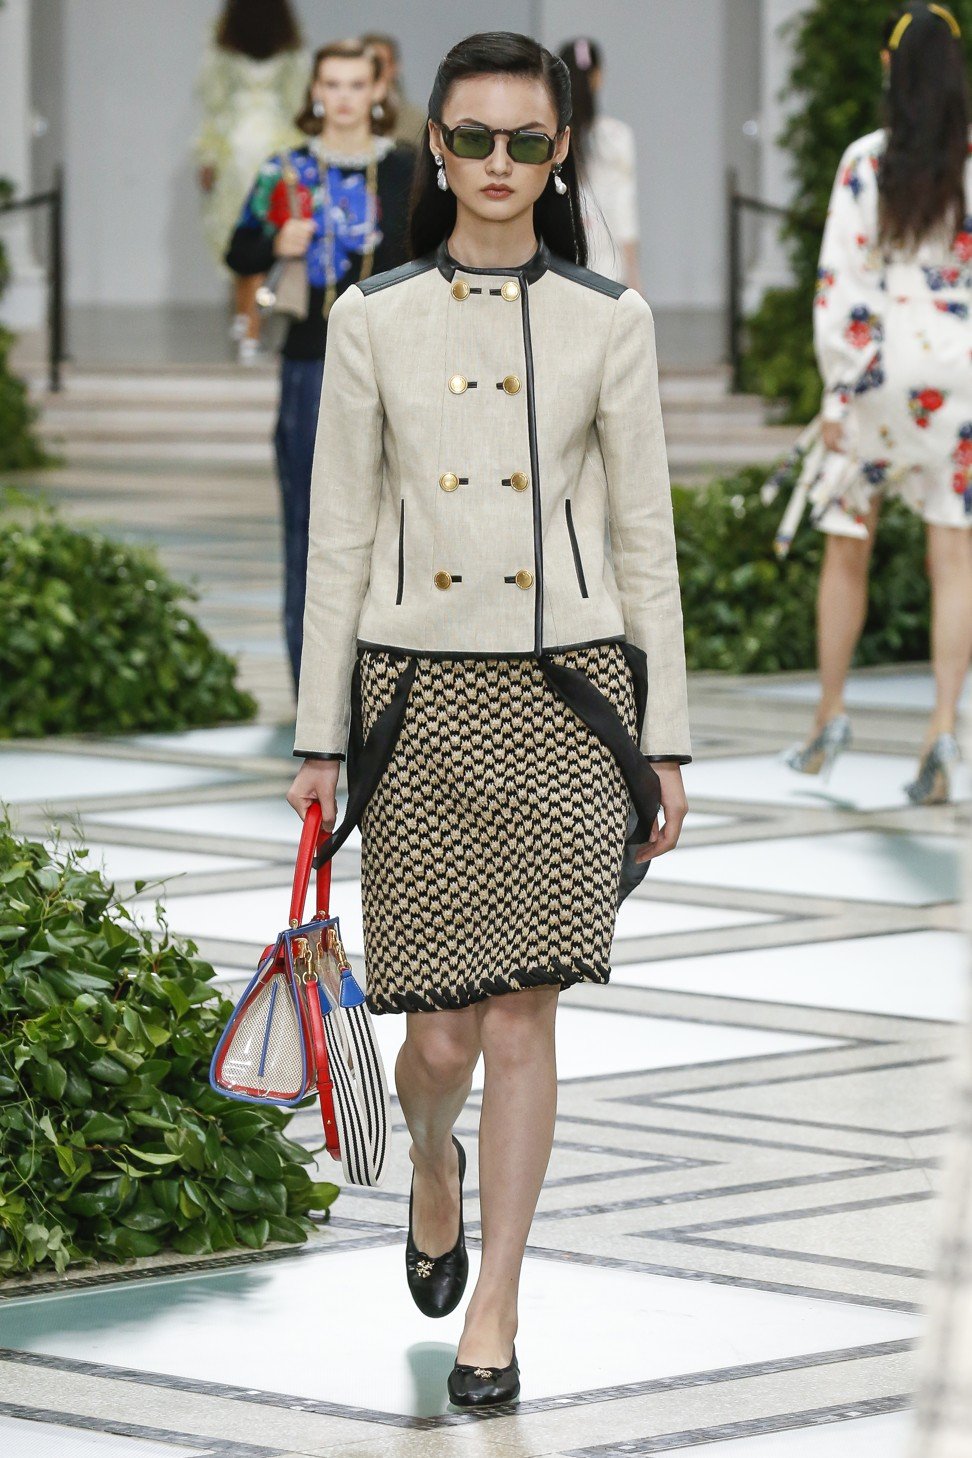 Tory Burch has found success in the accessories market, selling bags and shoes.